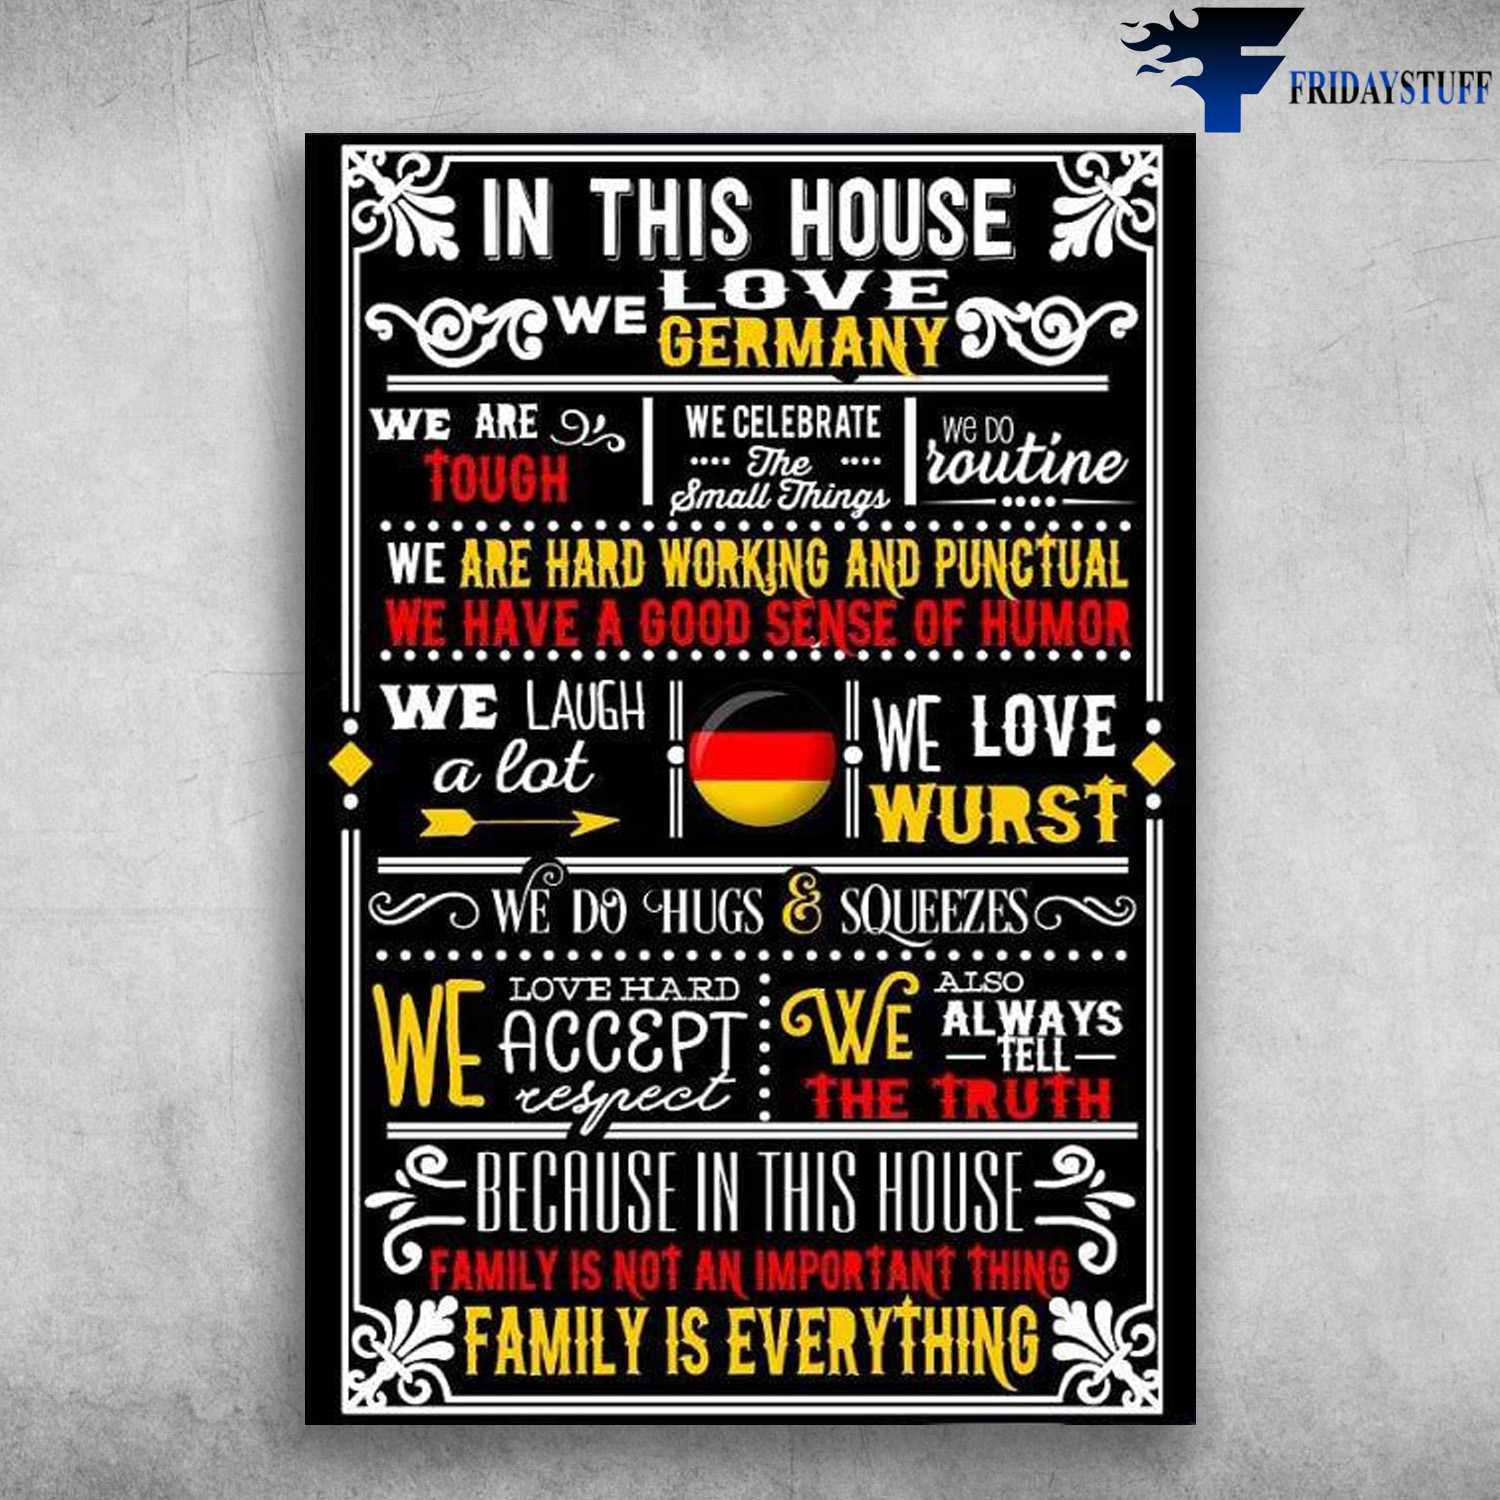 Germany House - In This House, We Love Germany, We Are Tough, We Celebrate The Small Things, We Do Routine, We Are Hard Working And Punctual, Family Is Everything